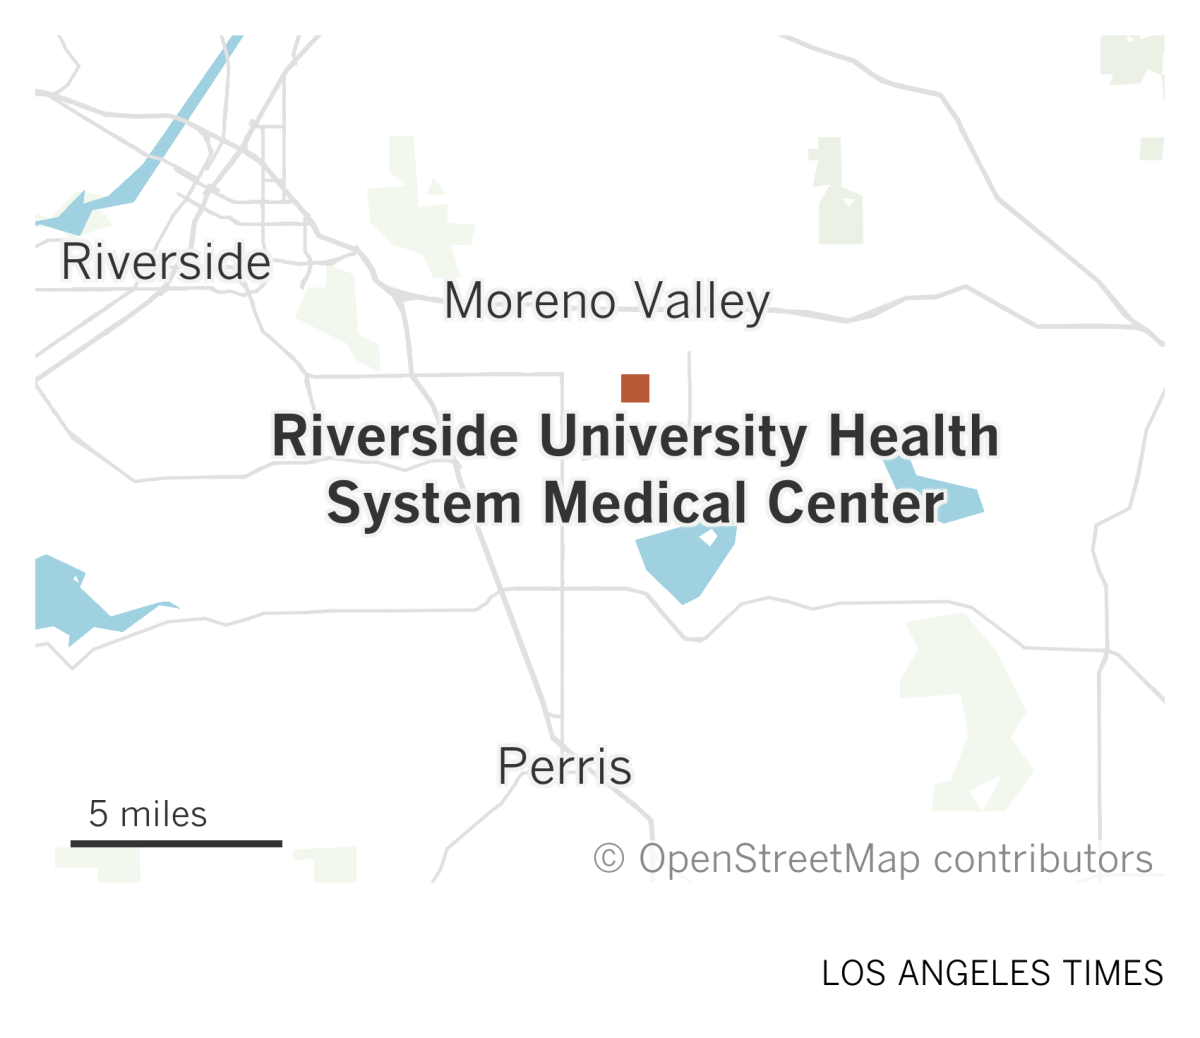 A map of Riverside County shows the location of Riverside University Health System Medical Center in Moreno Valley